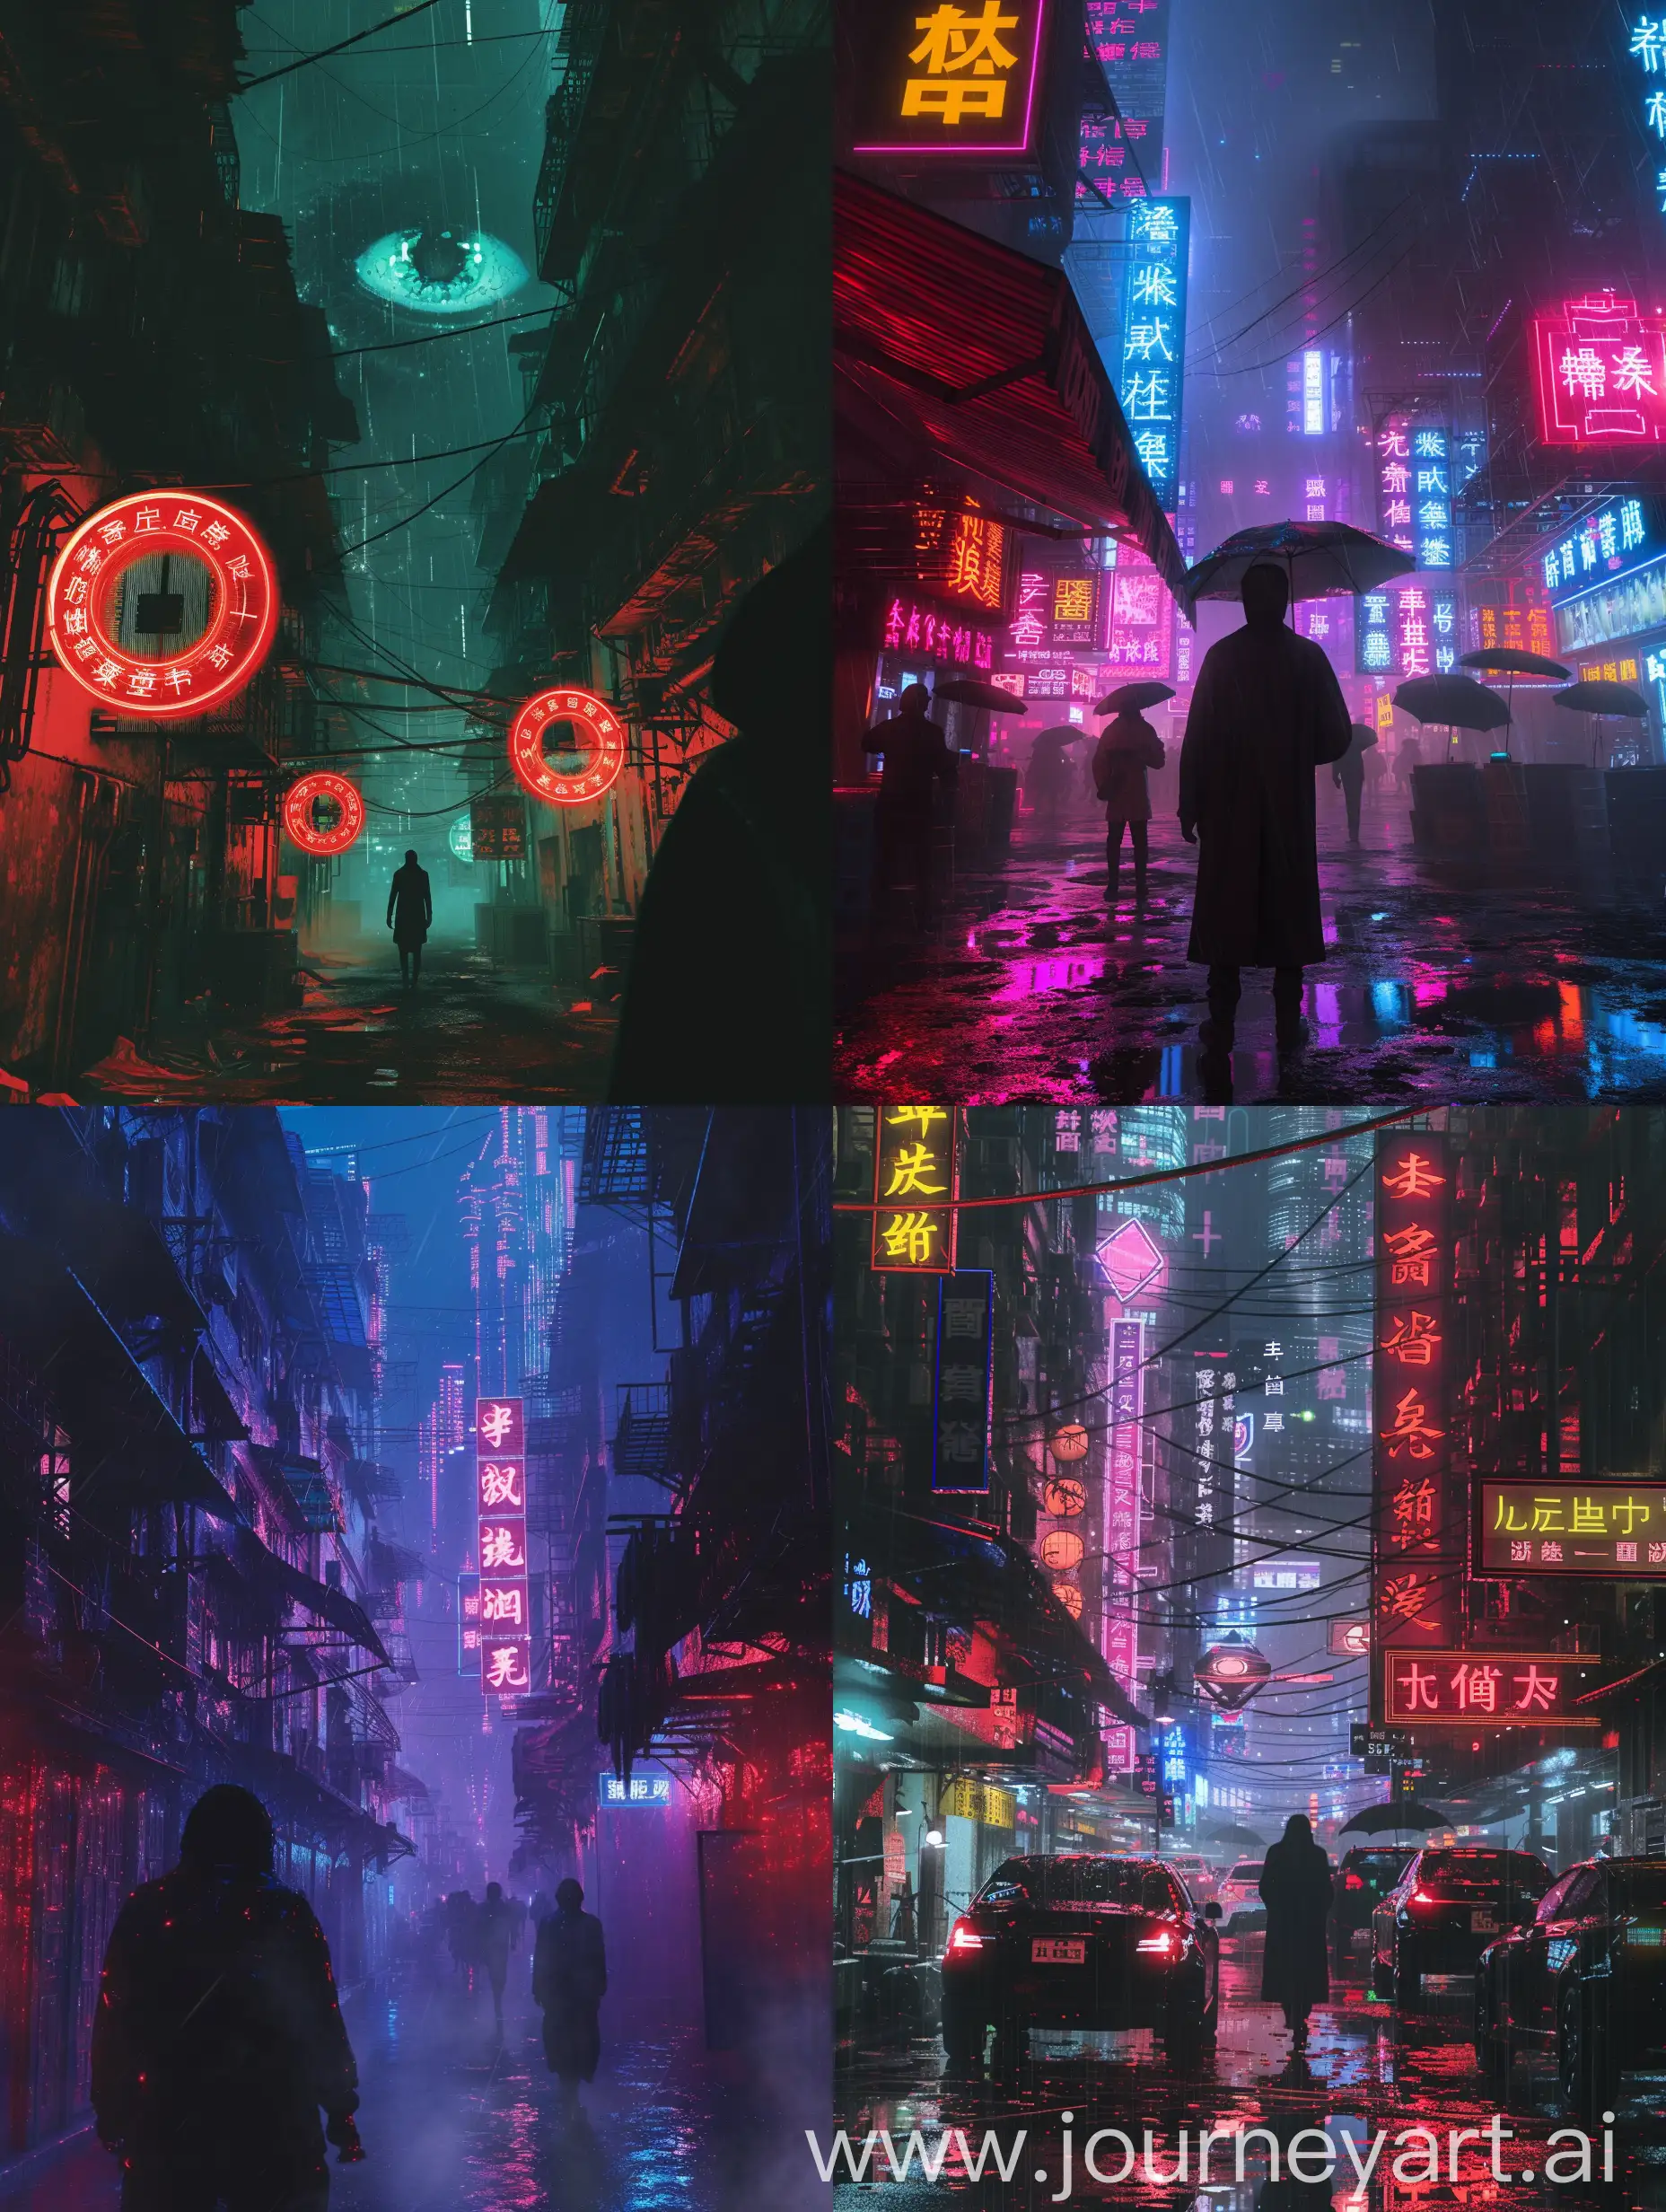 Merging the neon-drenched shadows of cyberpunk with the gritty realism of film noir, this project channels the haunting atmosphere of Blade Runner and the social commentary of Aldous Huxley. We delve into the underbelly of New Shanghai, a metropolis choked by neon and inequality. Here, human and machine blur in a constant dance of deceit.  I, armed with the digital brushstrokes of Photoshop, weave a narrative that shatters expectations and confronts the chilling truth – what defines us in a world where humanity can be replicated in circuits?  As augmented eyes fail to distinguish flesh from code, a web of paranoia and suspicion engulfs the city. Can loyalty survive in this digital twilight?

This description incorporates similar elements:

Genre fusion: Cyberpunk and film noir
Inspirational figures: Blade Runner (film) and Aldous Huxley (author)
Setting: New Shanghai (futuristic, neon-drenched city)
Themes: Societal decay, identity crisis, technology vs. humanity
Tools: Digital art (Photoshop in this case)
Narrative style: Mystery, suspense, questioning authority